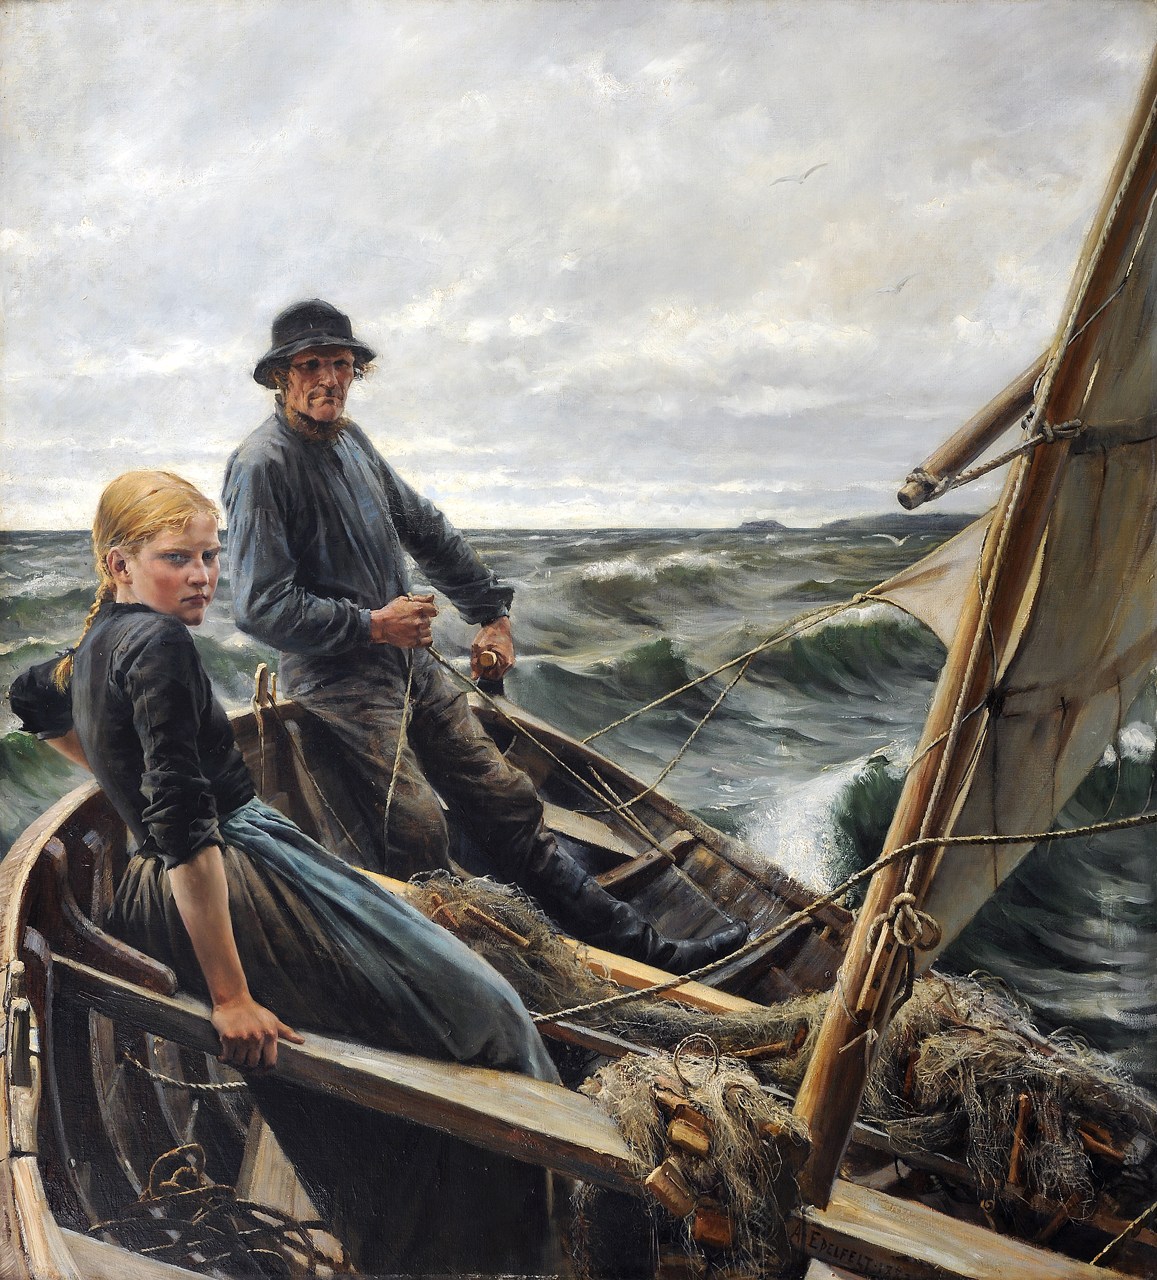 A man and a young girl on a sailboat in the ocean staring in the direction of the viewer